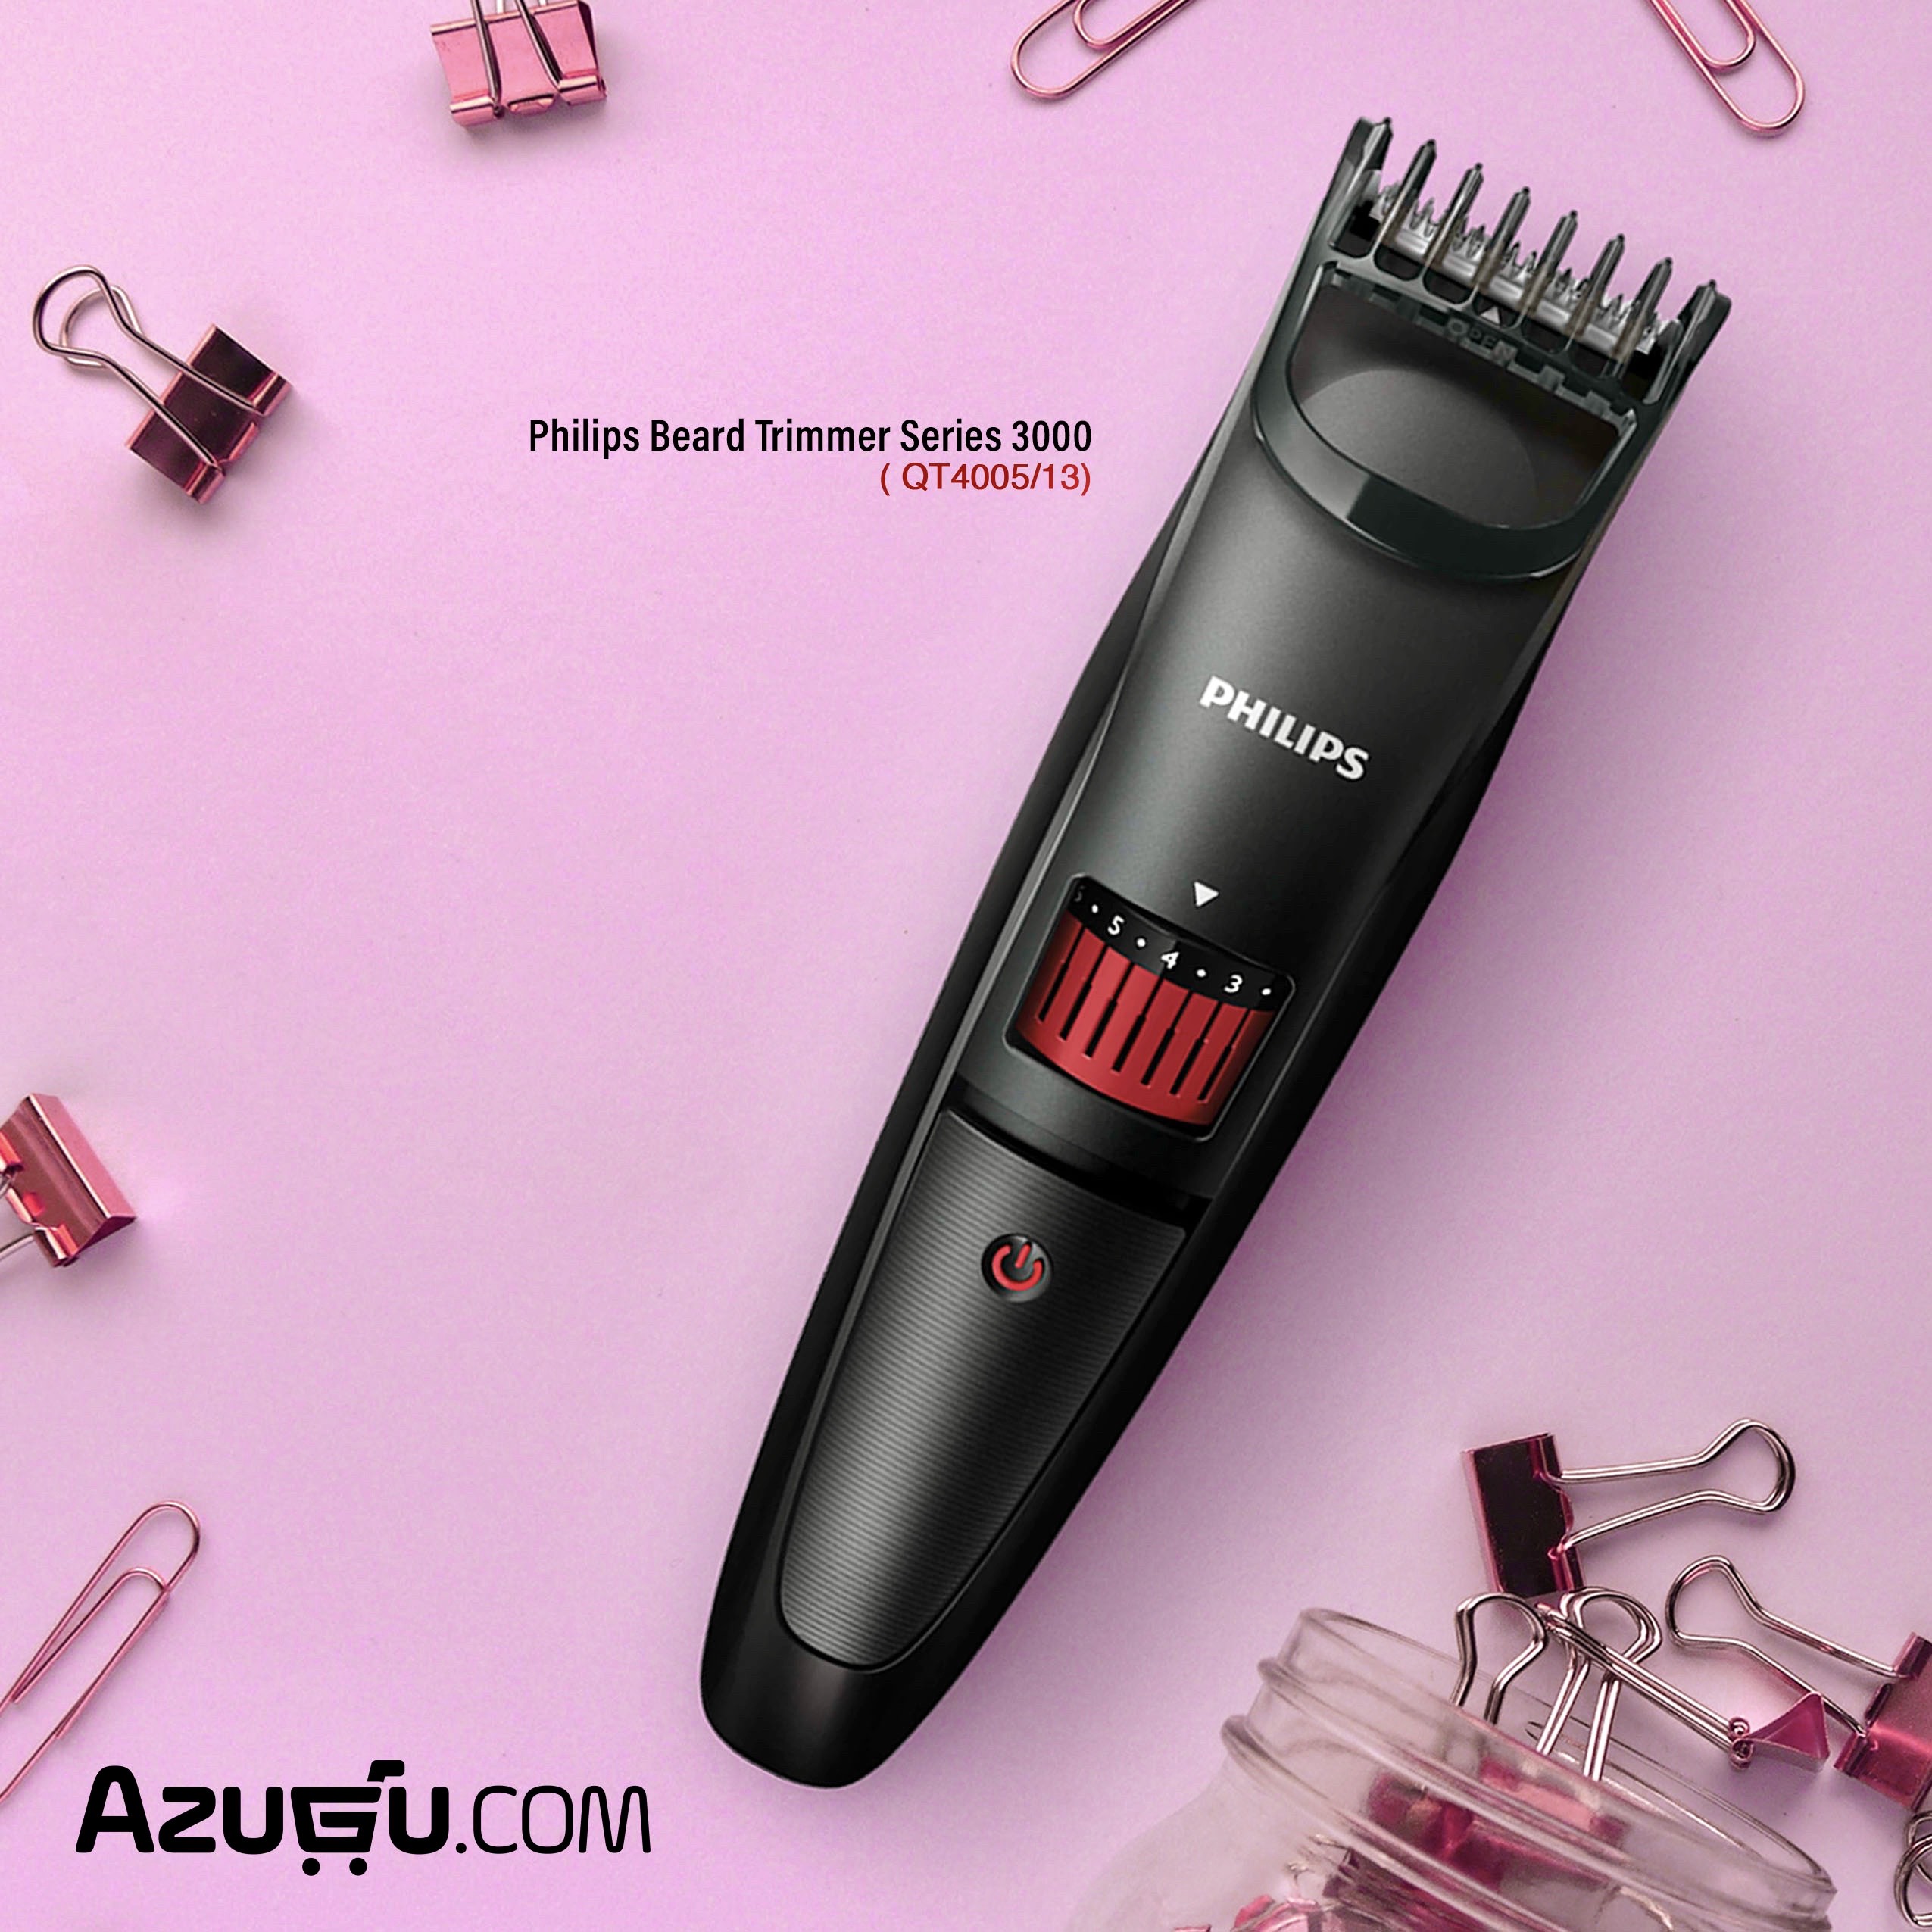 falso técnico Por encima de la cabeza y el hombro Azugu on Twitter: "Style your beard the way you want with this beard  trimmer. ⁣⁣ ⁣⁣ Check out features of this Philips Beard Trimmer Series 3000  (QT4005/13⁣)⁣ &amp; place an order here: